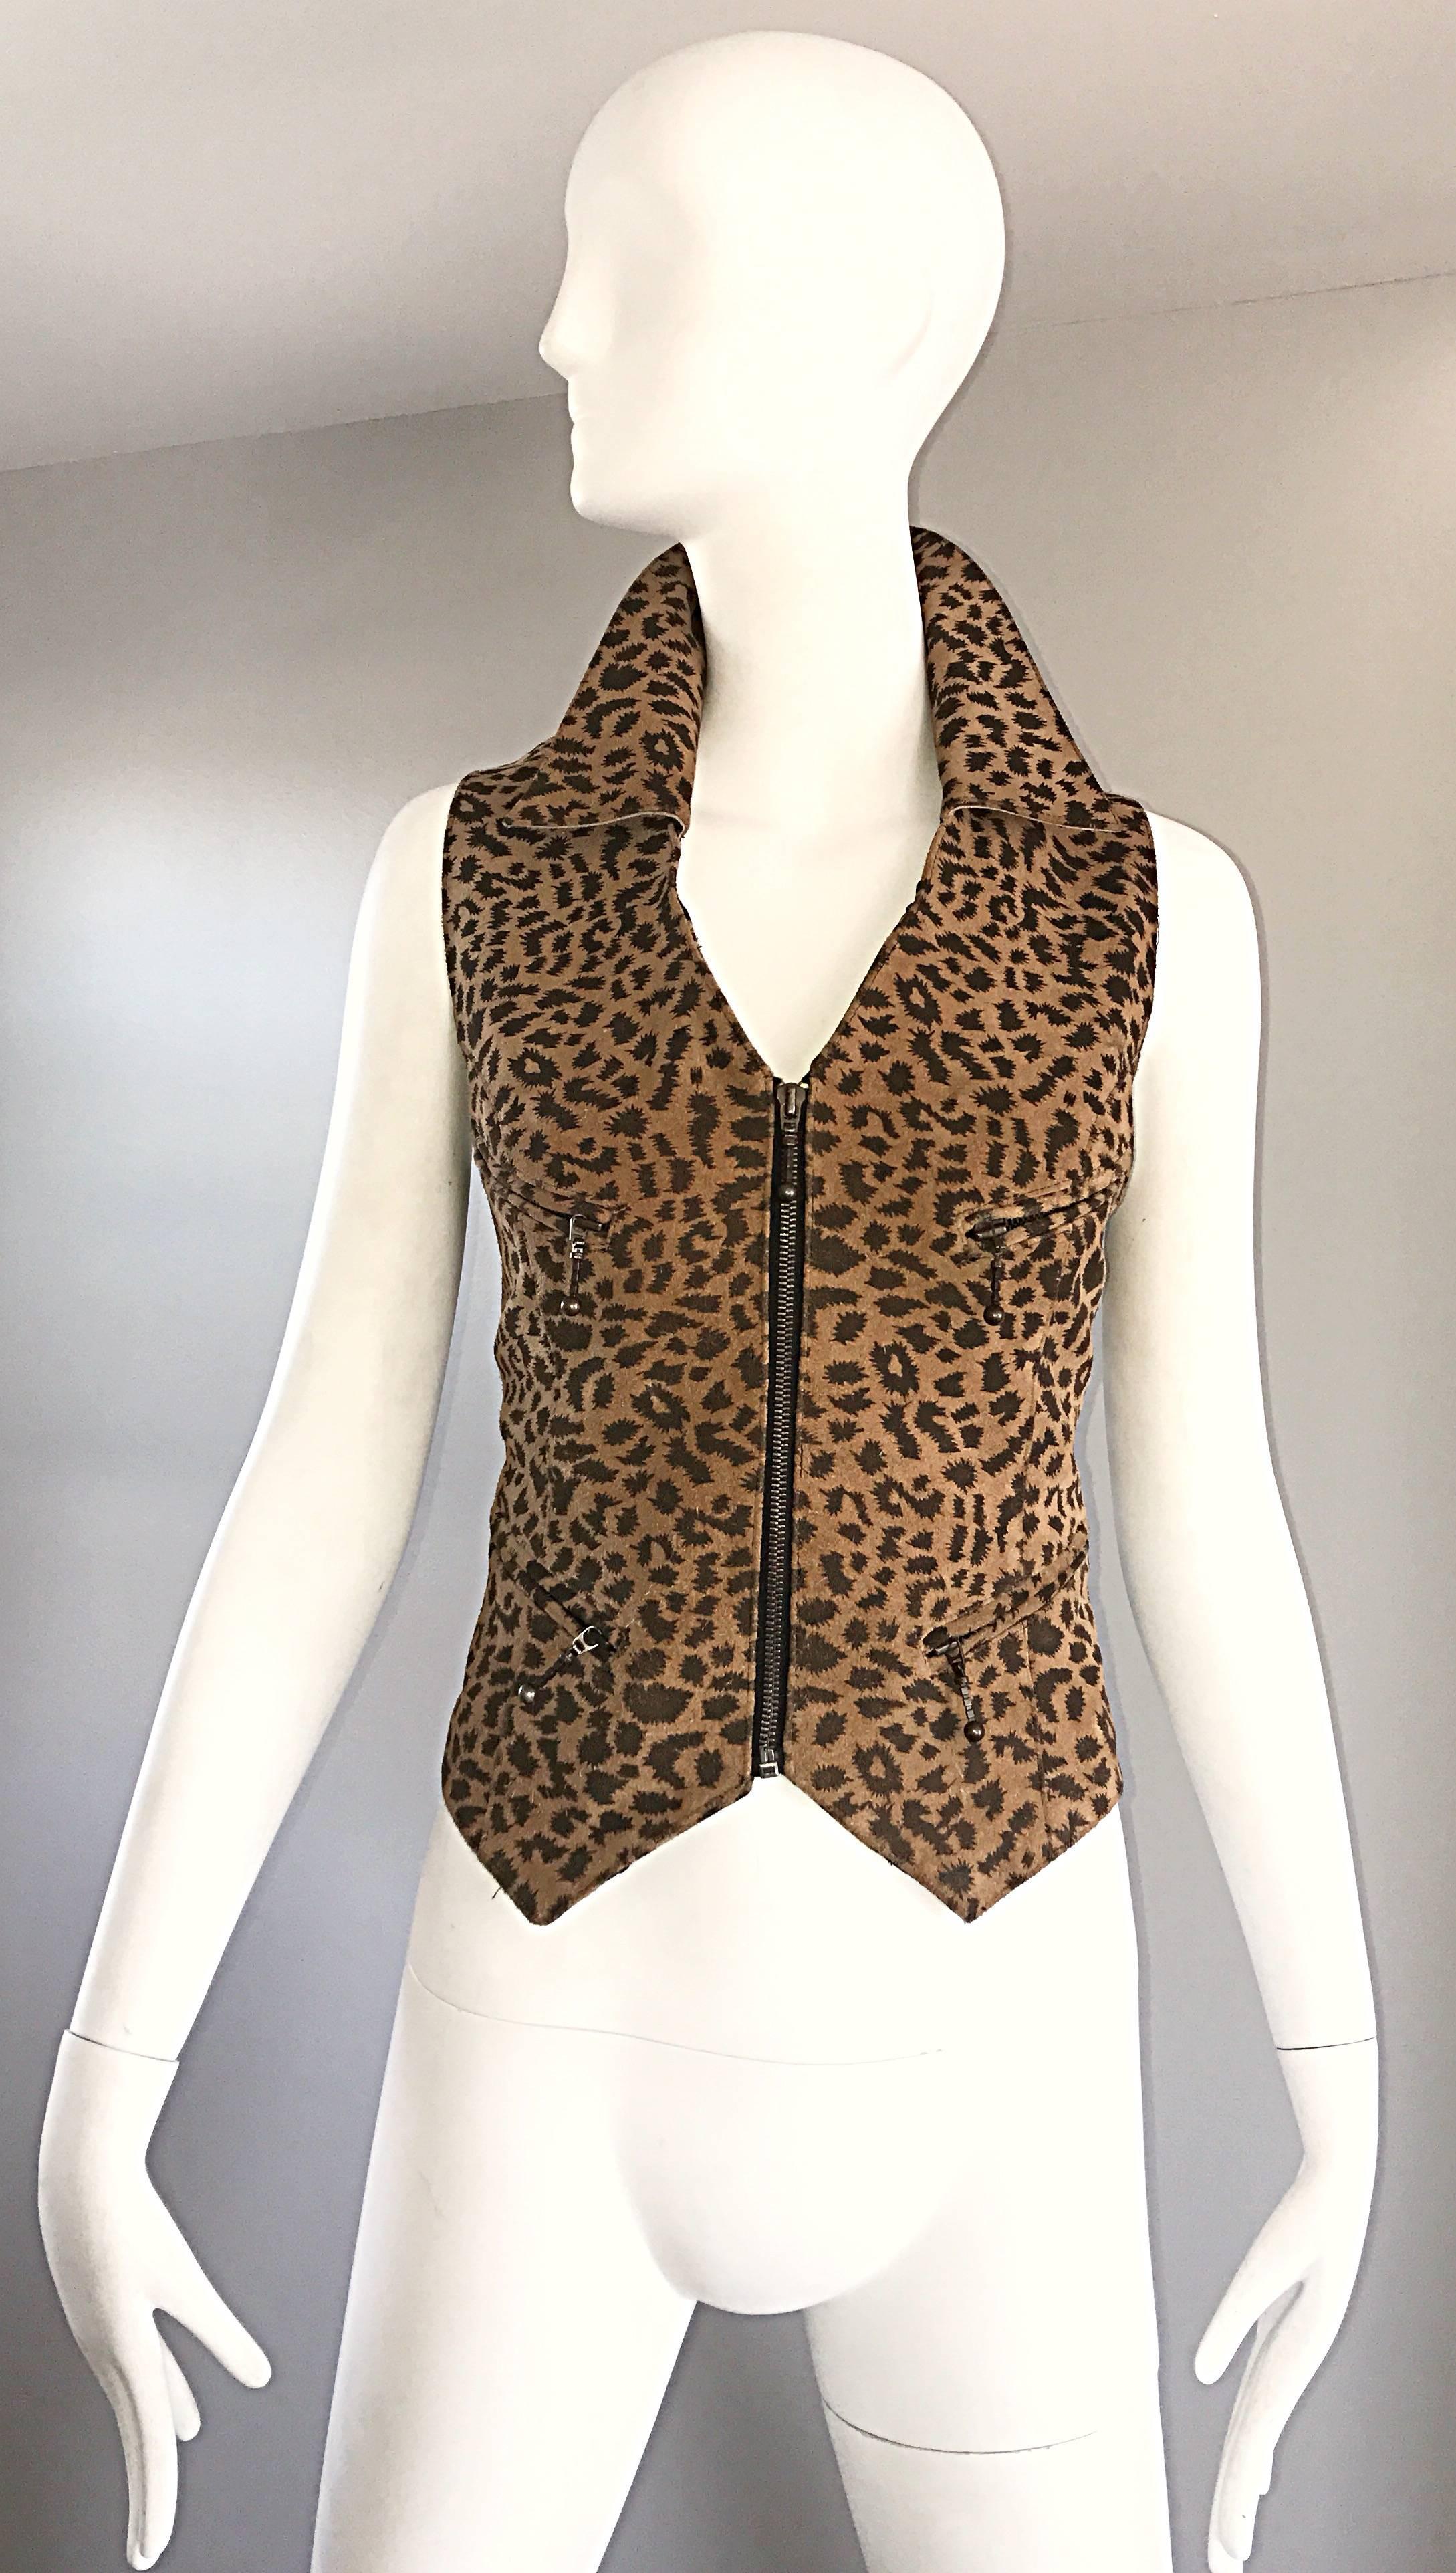 Sexy 1990s leopard print leather / suede vest! Features the classic animal print throughout. Chic collar can be worn flipped up for a little extra sass! Brass metal zipper up the front. Four functional pockets on the front. Adjustable belt in the